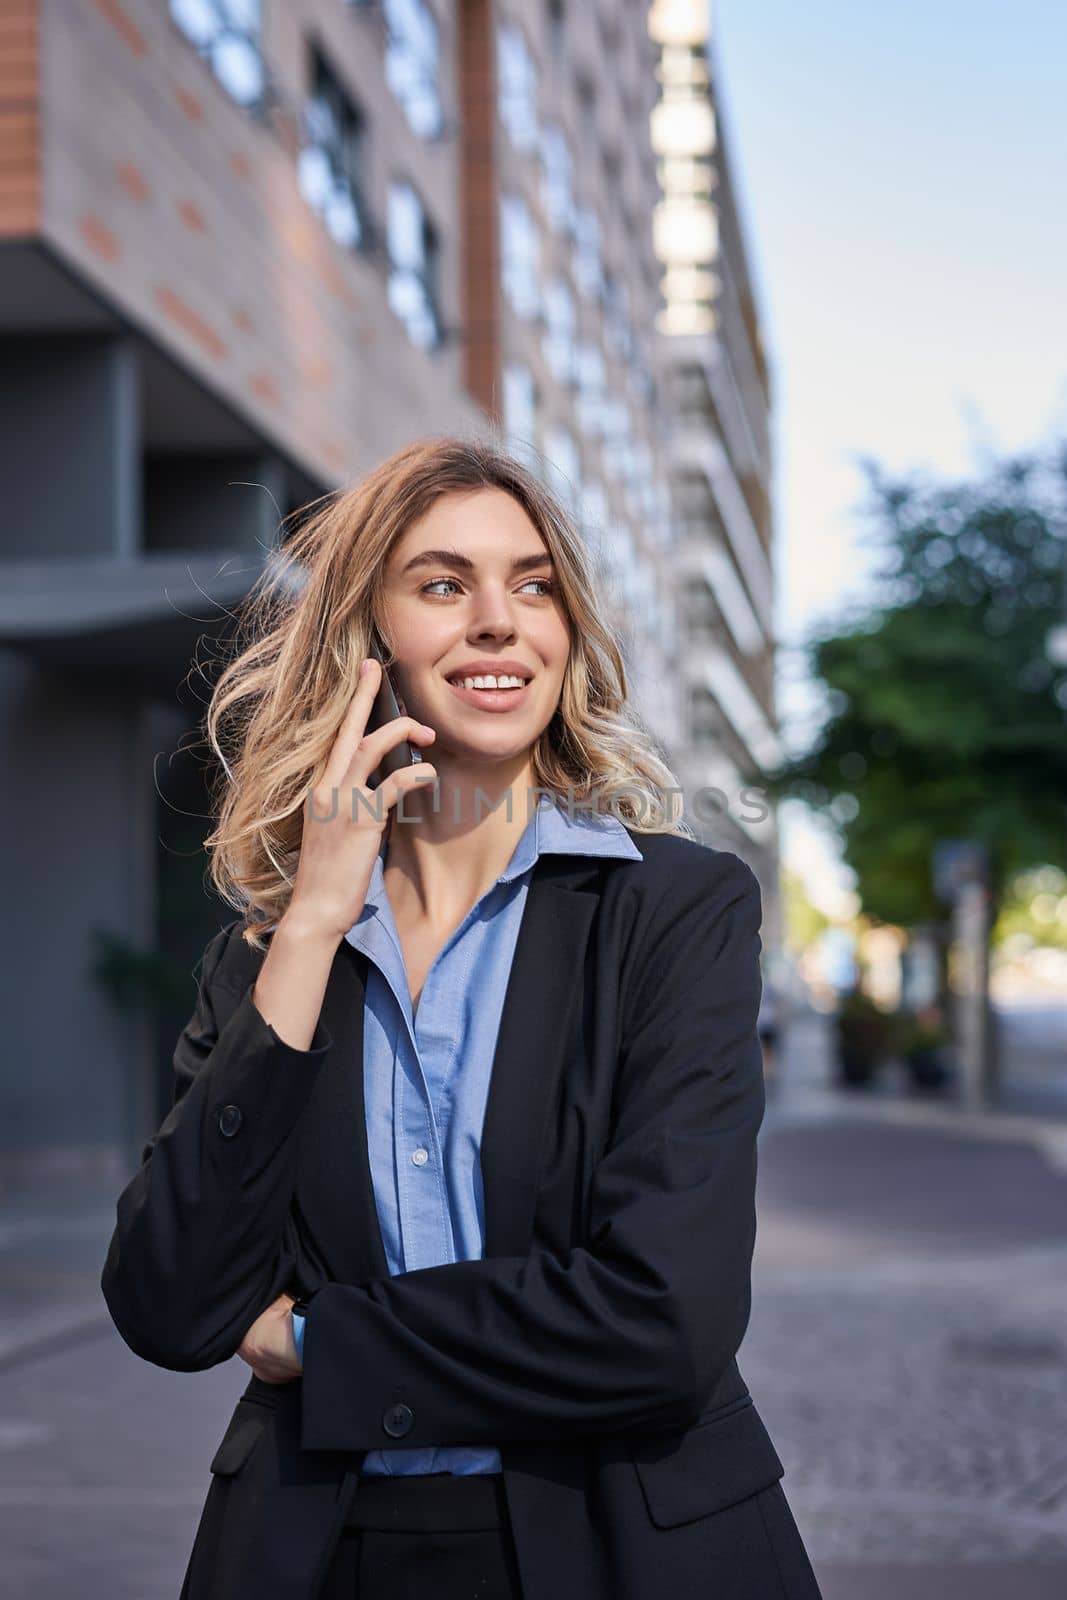 Vertical shot of confident young businesswoman making phone call, standing on street and talking on telephone.